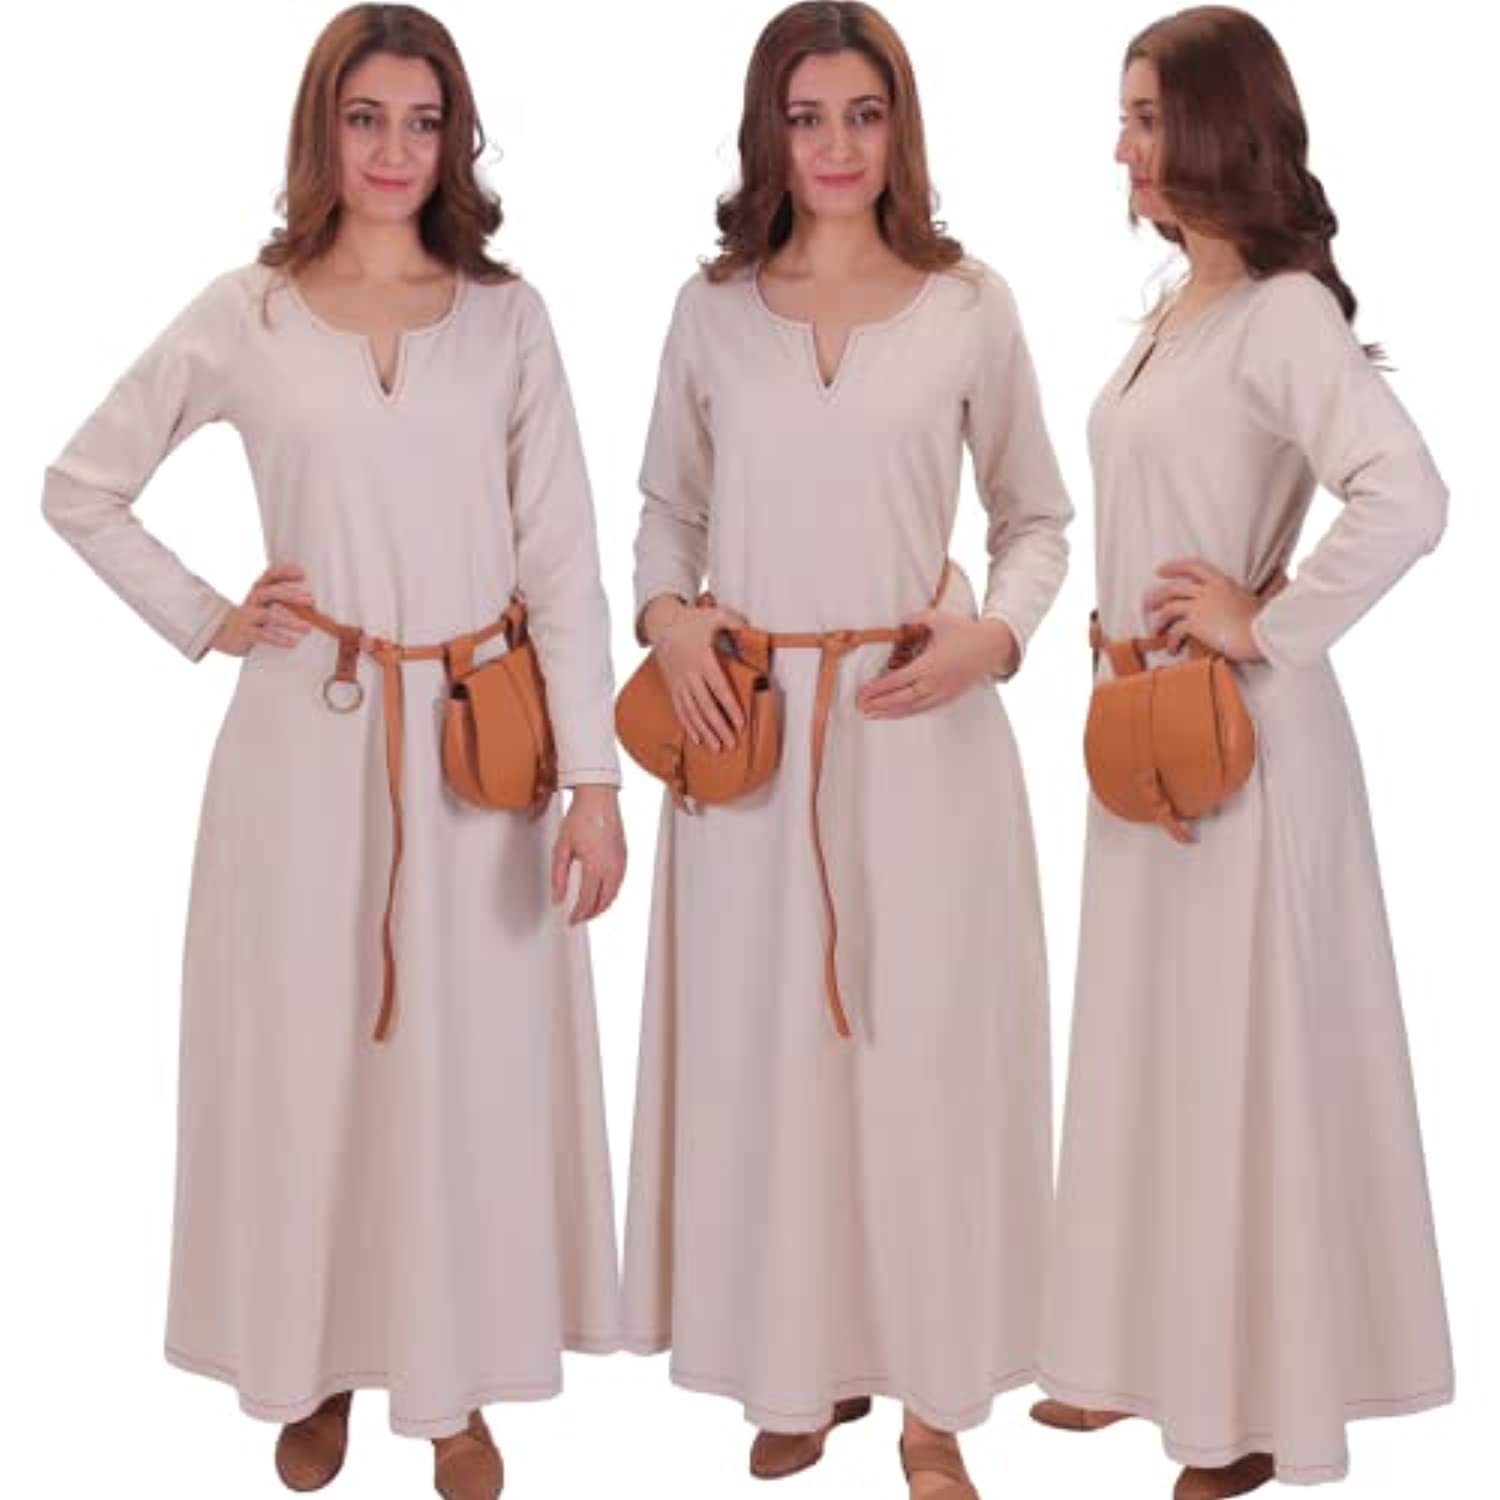 Viking Under Dress in Cotton for Every Day Wear